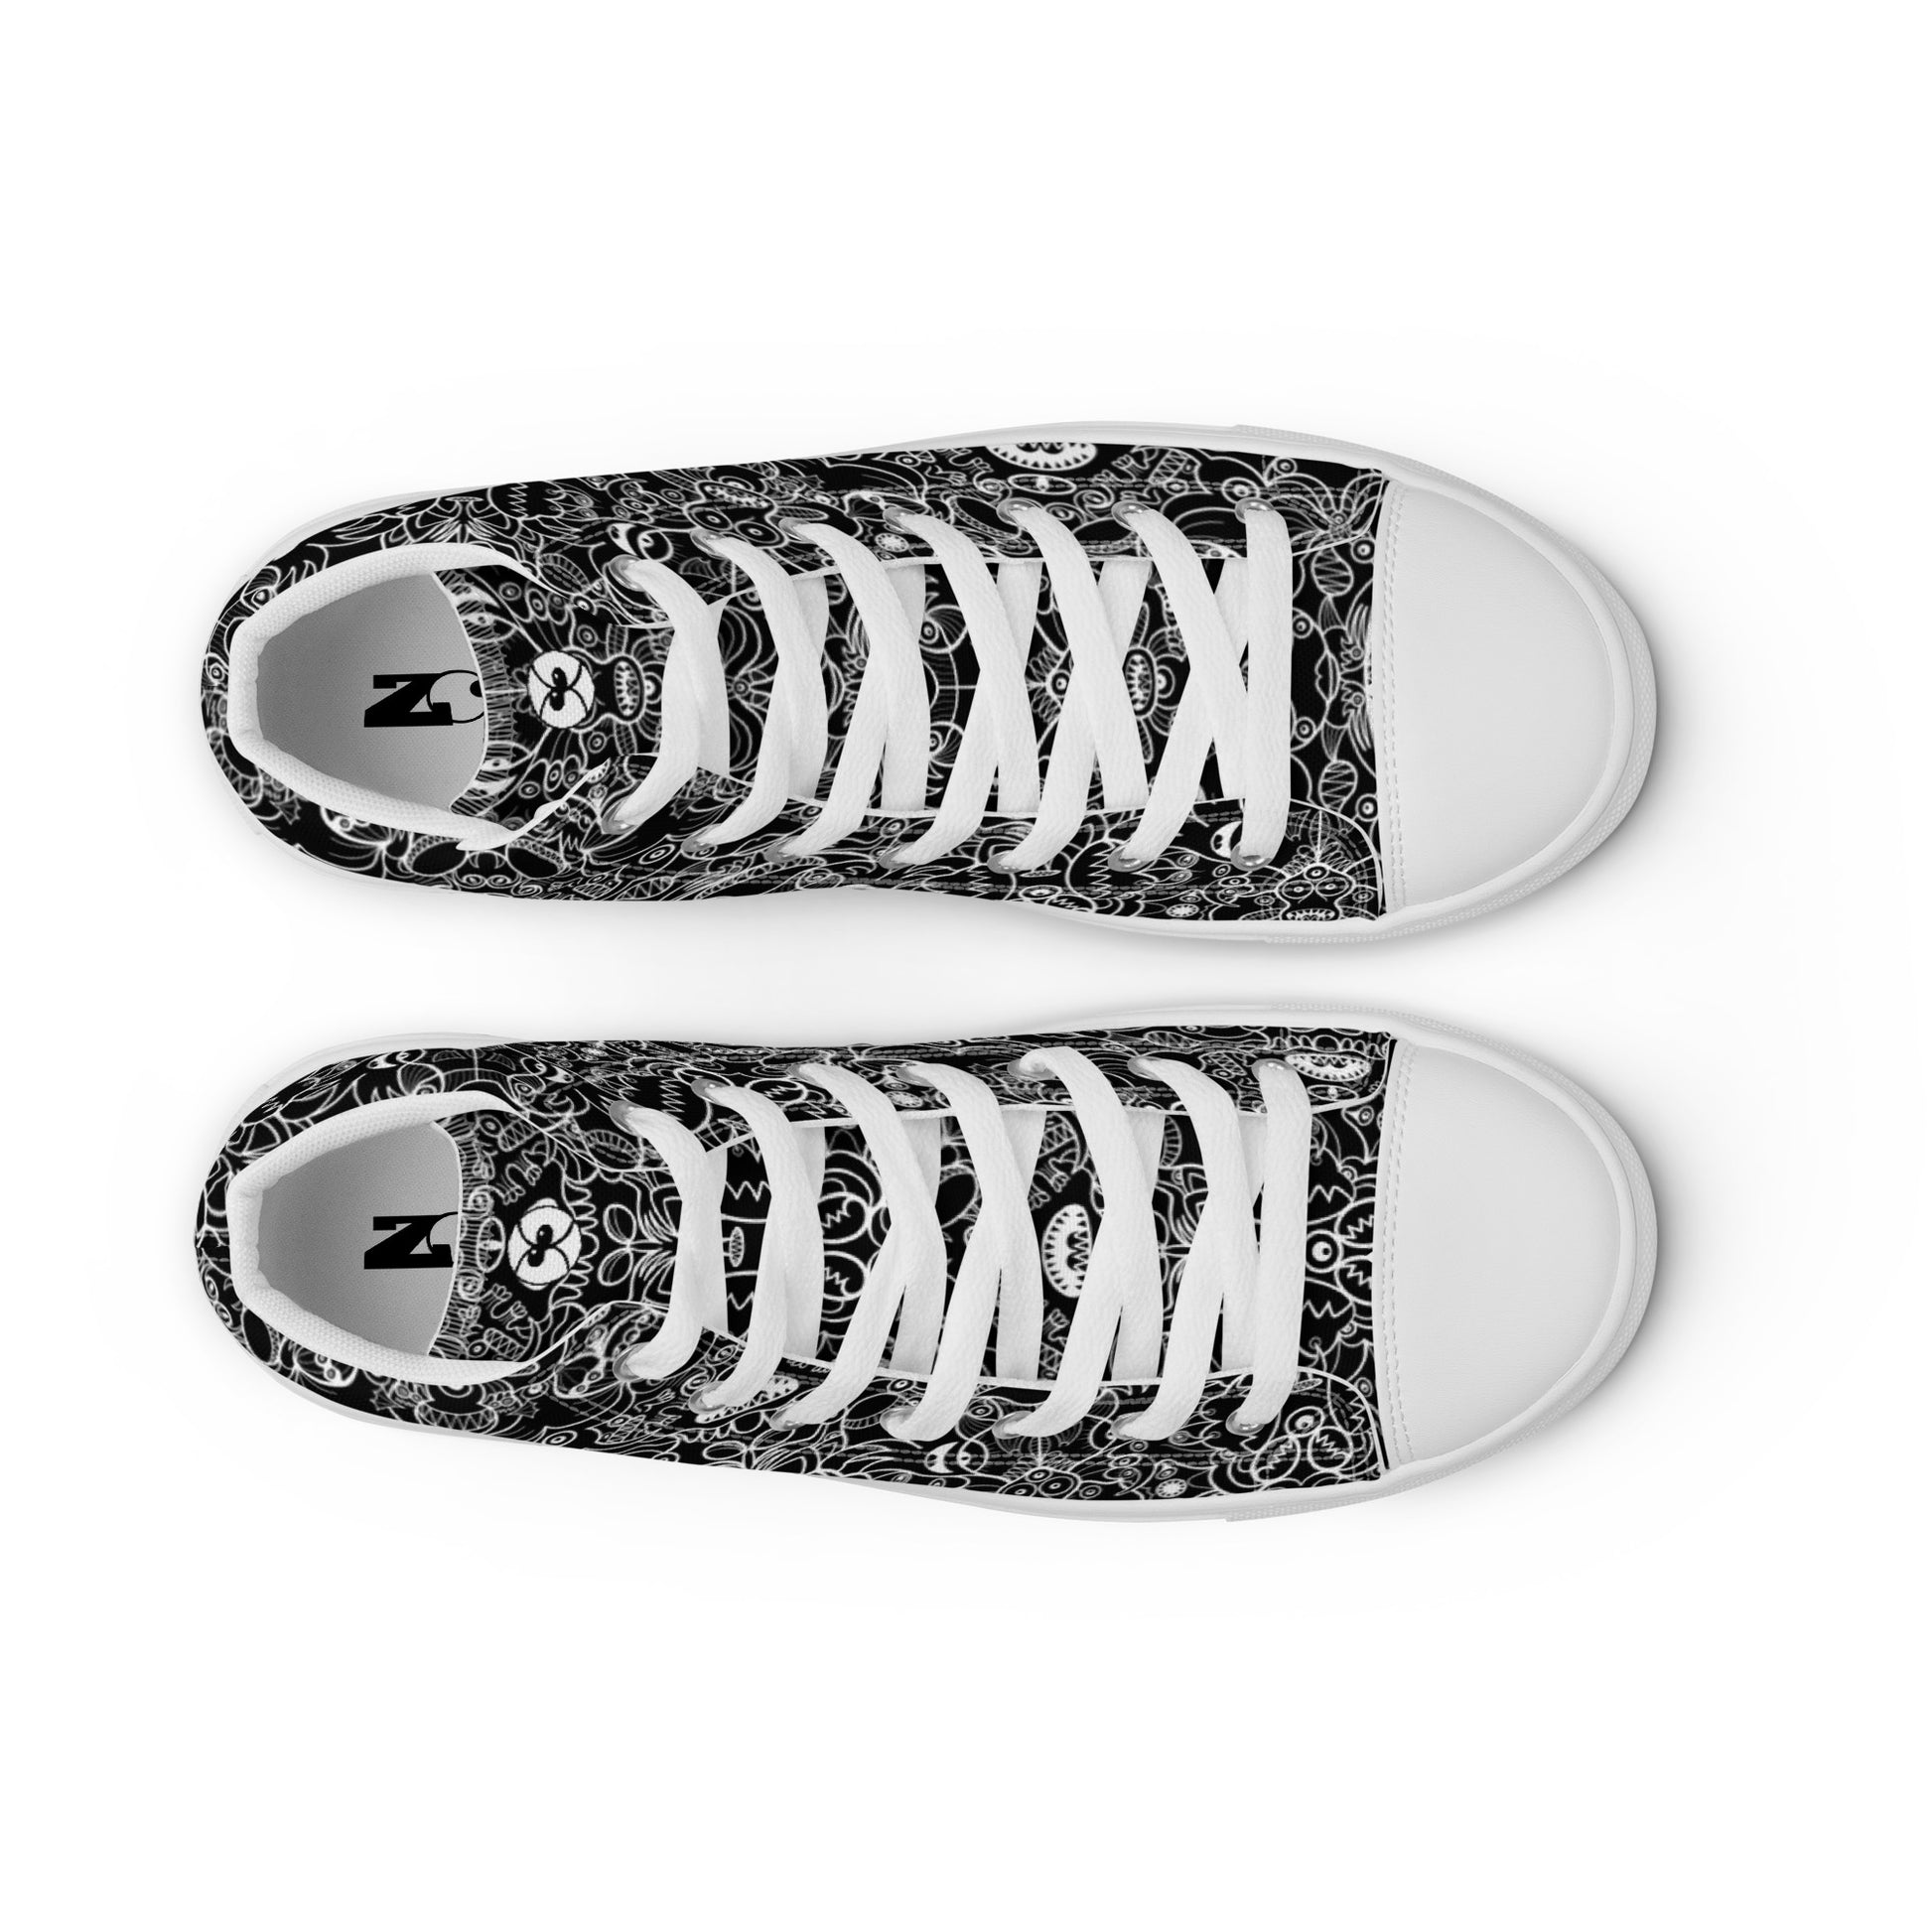 The powerful dark side of the Doodle world Men’s high top canvas shoes. Top view